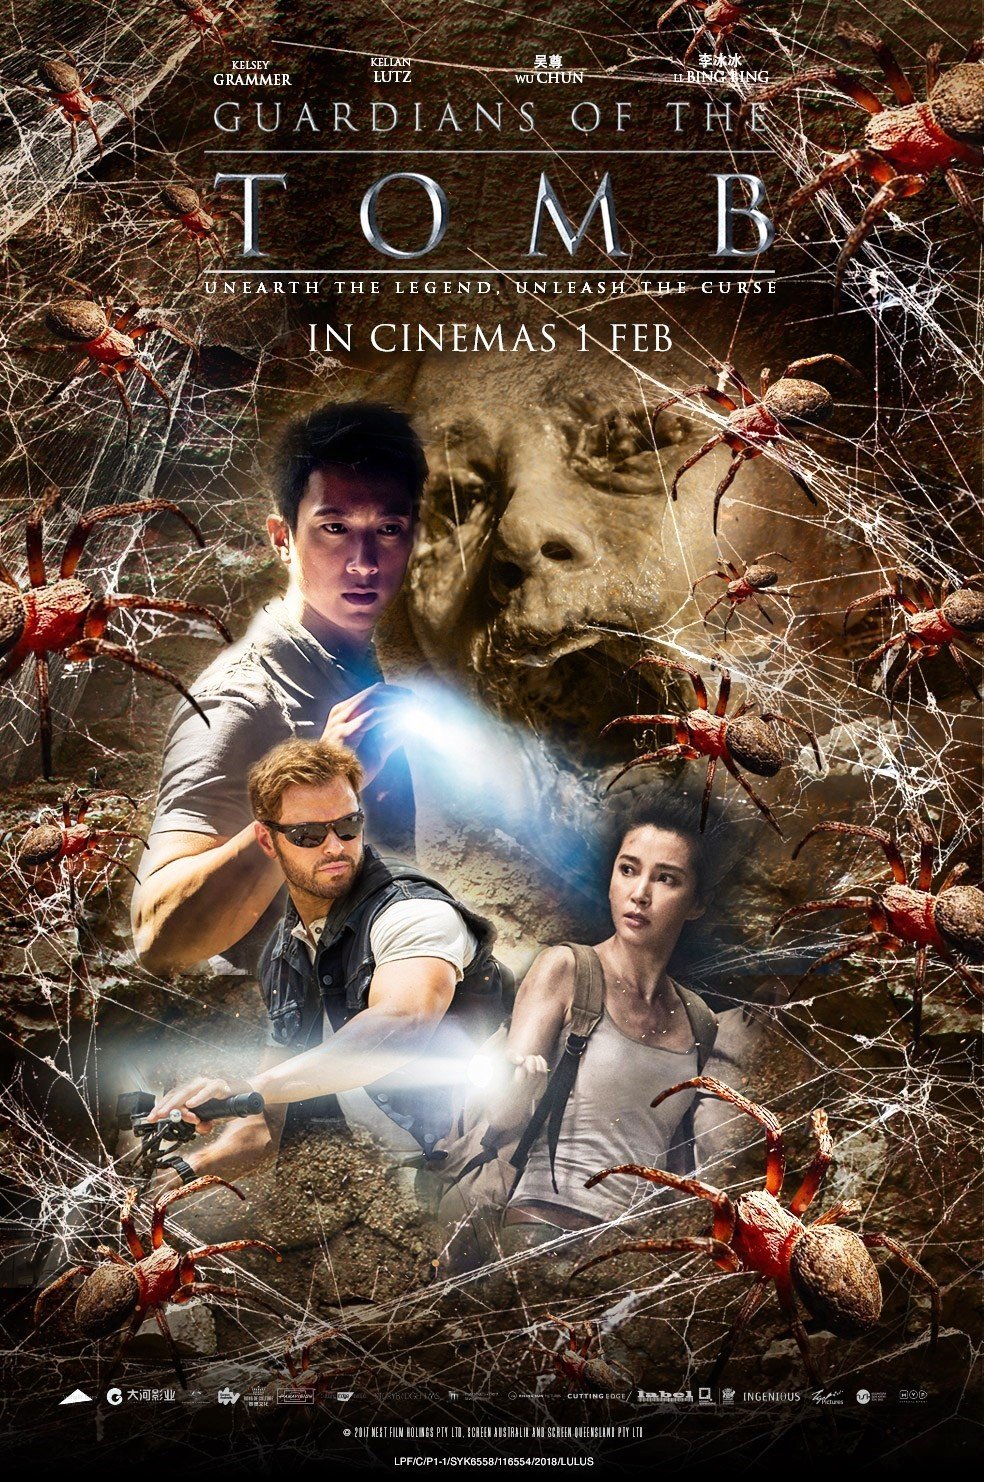 Poster of Arclight Films' 7 Guardians of the Tomb (2018)